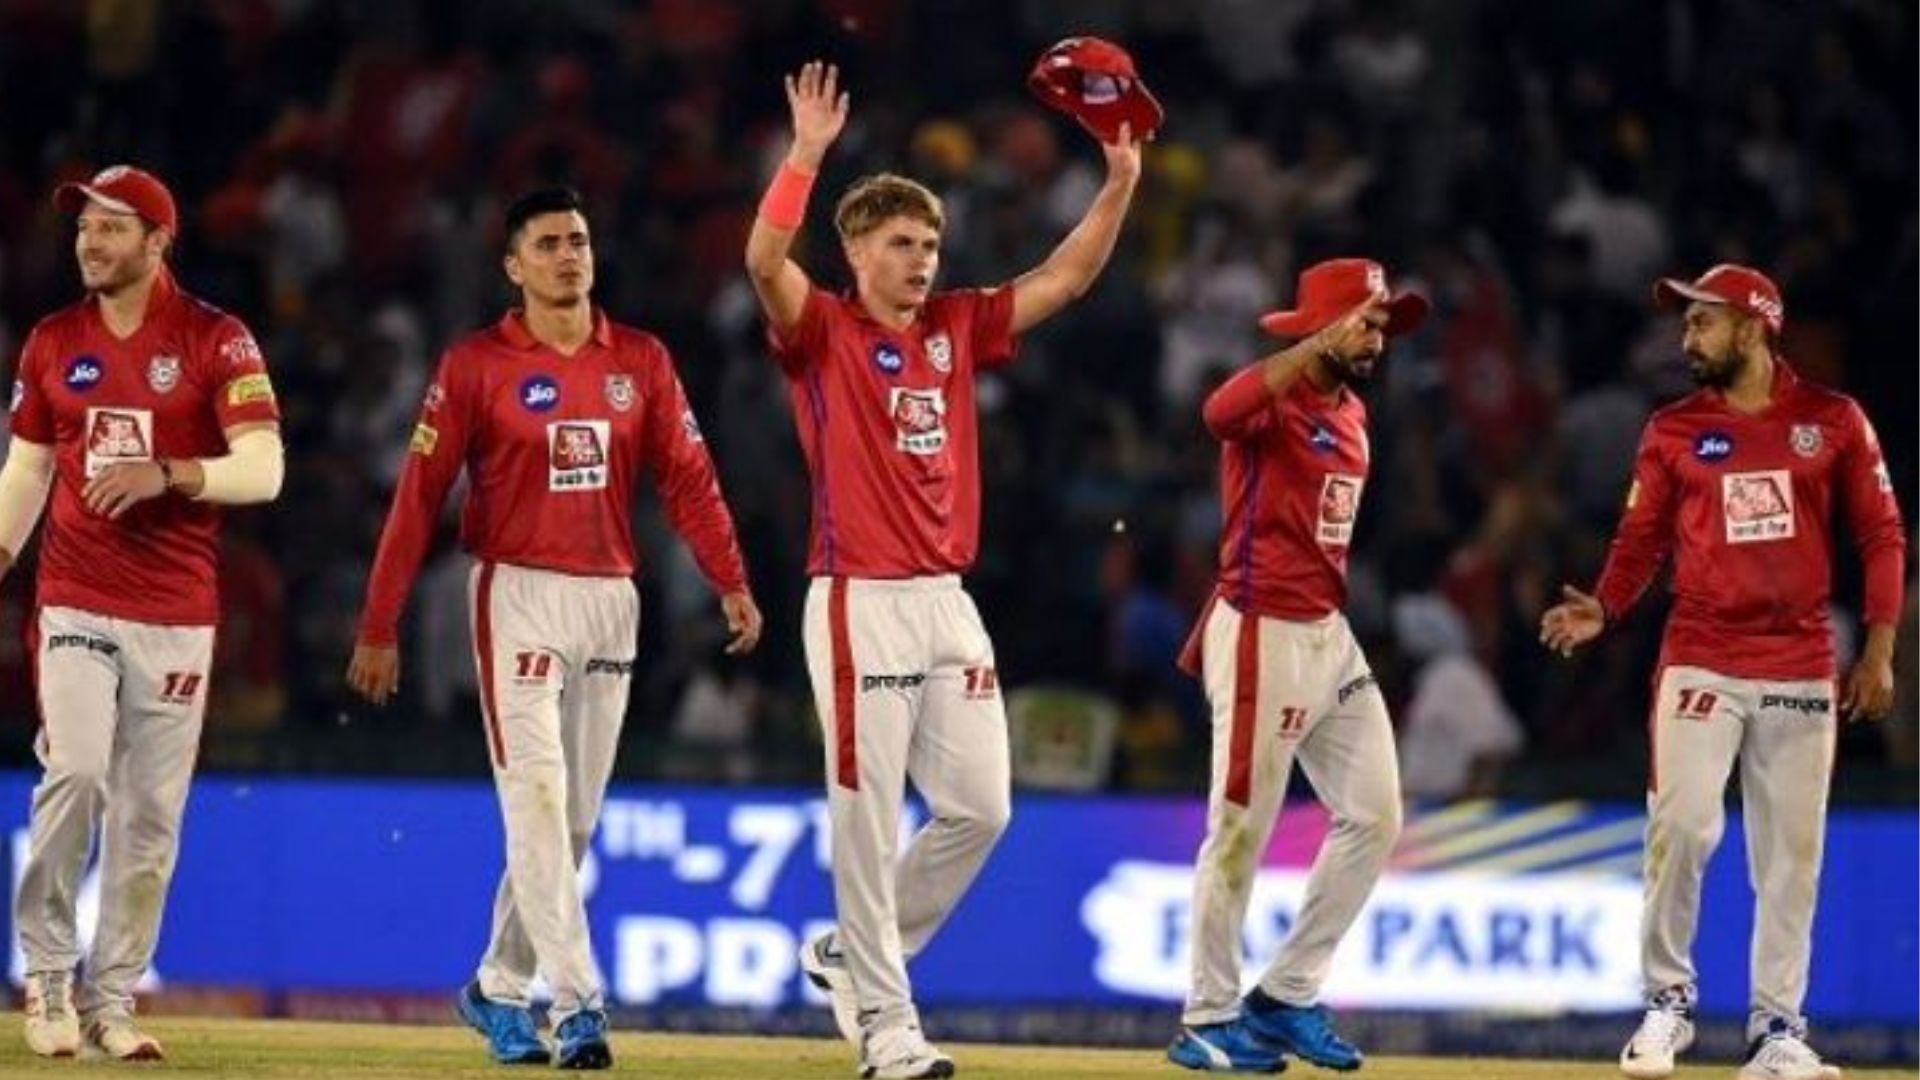 Sam Curran was bought at a record breaking INR 18.50 crore by the Punjab Kings